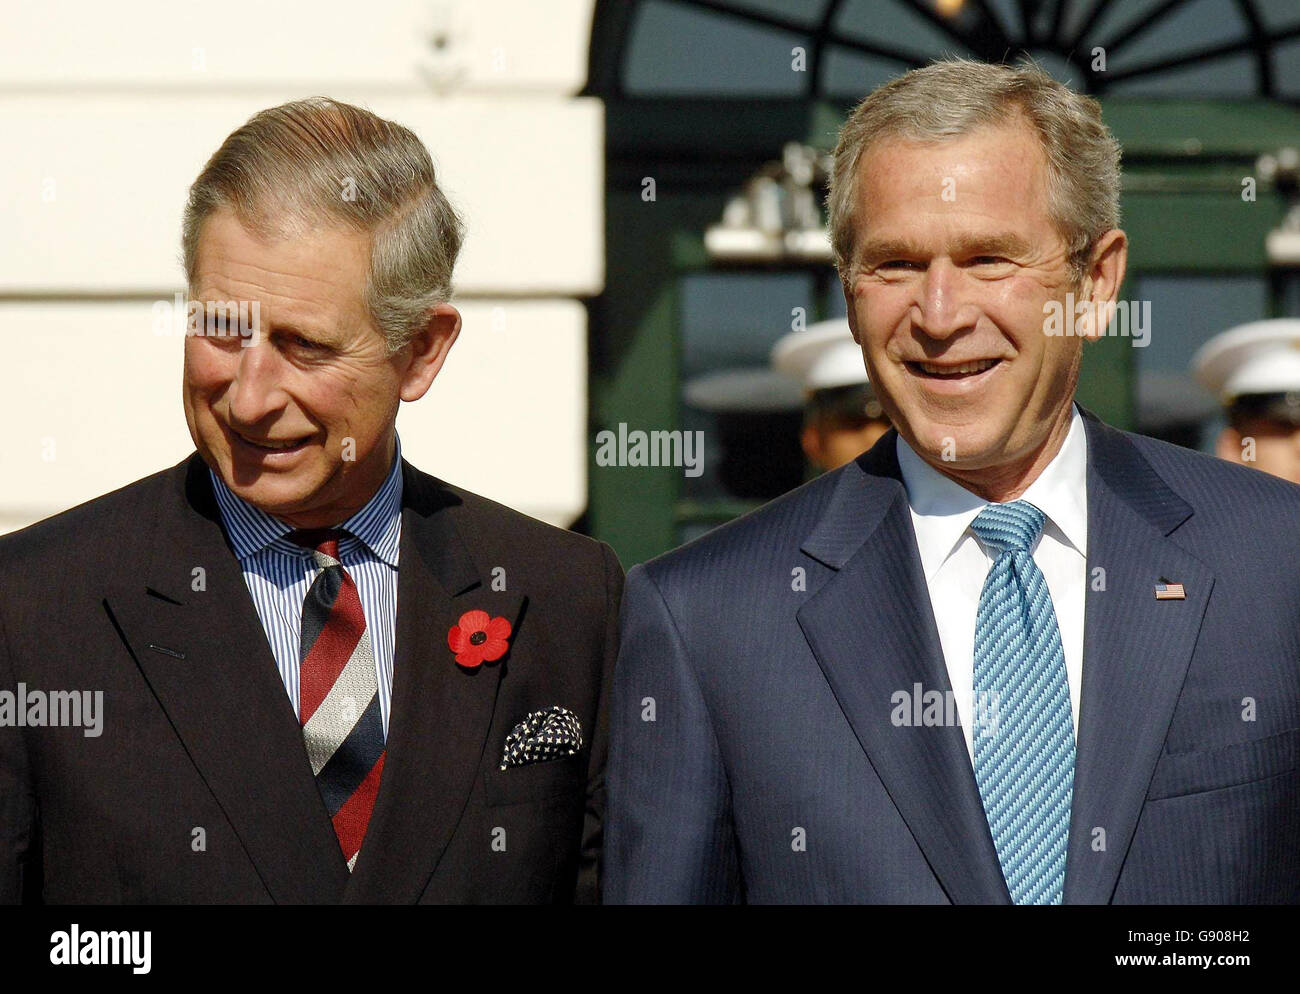 (L - r) The Prince of Wales and President George W Bush on the South lawn of the White House in Washington DC, Wednesday November 2, 2005. The Prince and the Duchess of Cornwall will take both lunch and dinner with the President after arriving from New York, on the second day of their week-long trip to the USA. See PA story ROYAL Charles. PRESS ASSOCIATION Photo. Photo credit should read: John Stillwell/PA. Stock Photo